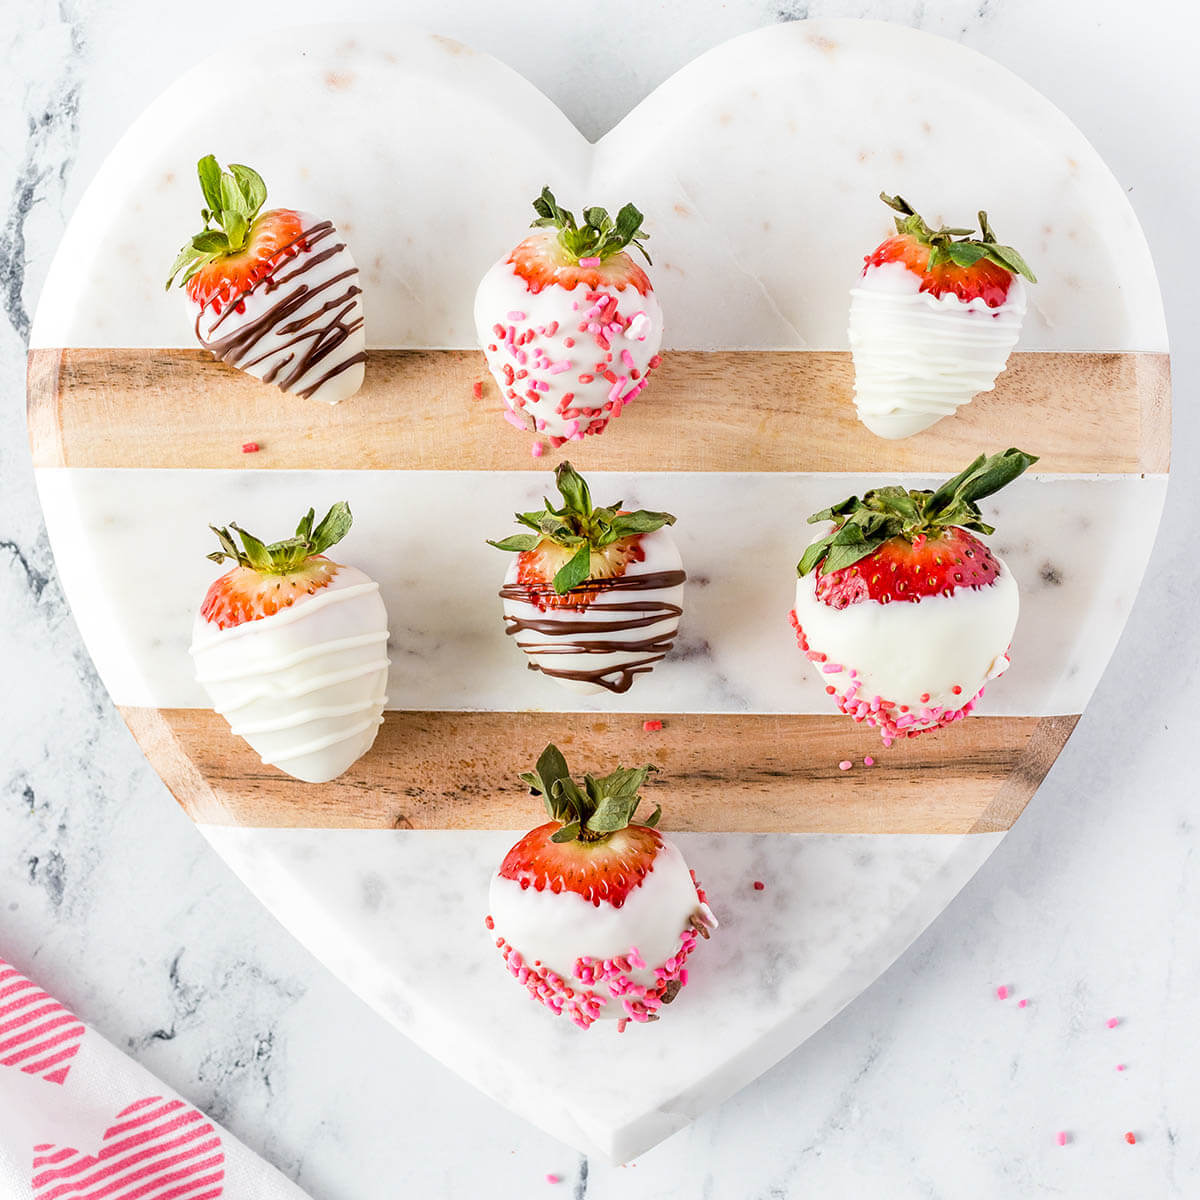 White Chocolate Covered Strawberries on a platter.